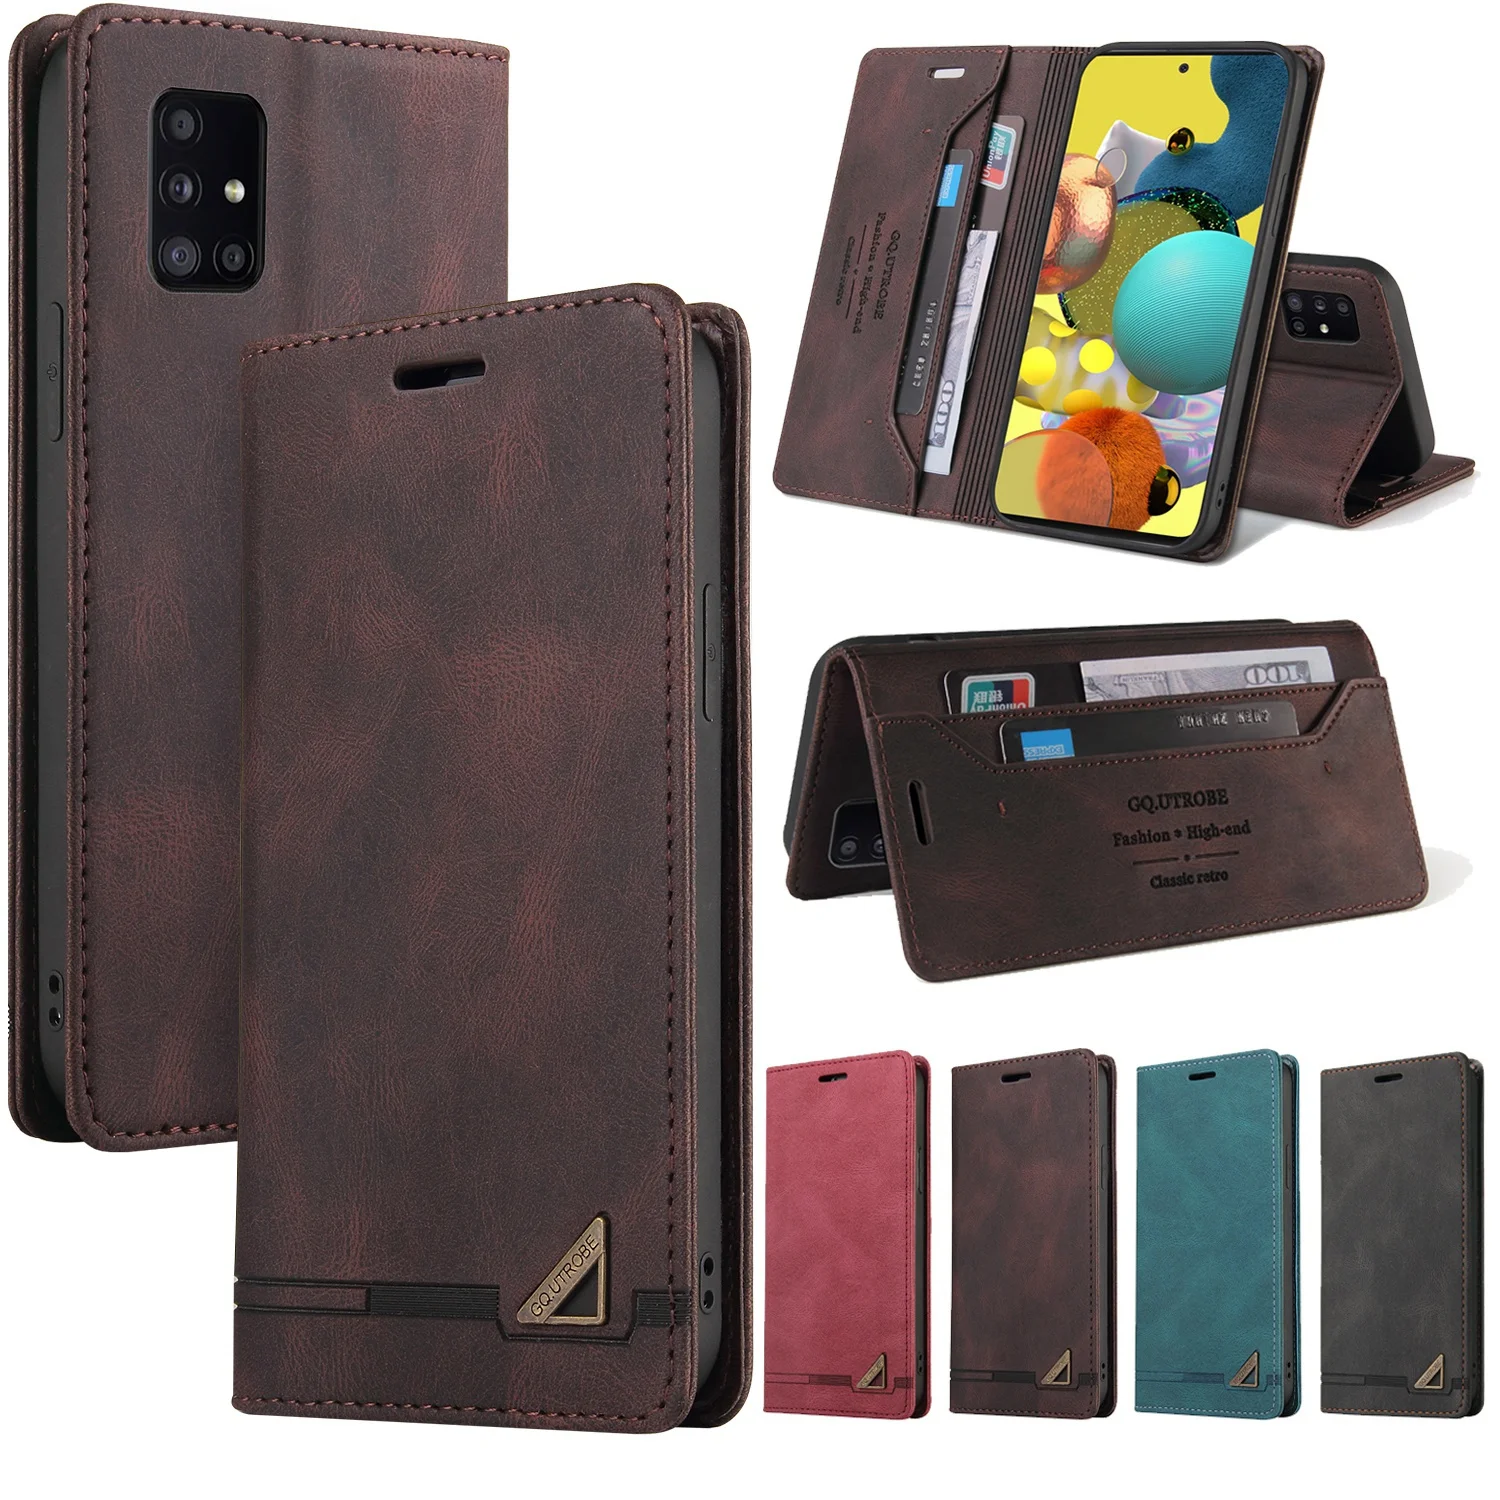 

Magnetic Leather Case For Samsung Galaxy Note20 S21 S20 FE Ultra Note10 S10 S9 S8 Plus A10S A20S A51 A71 A11 A21 A31 A41 A12 A21